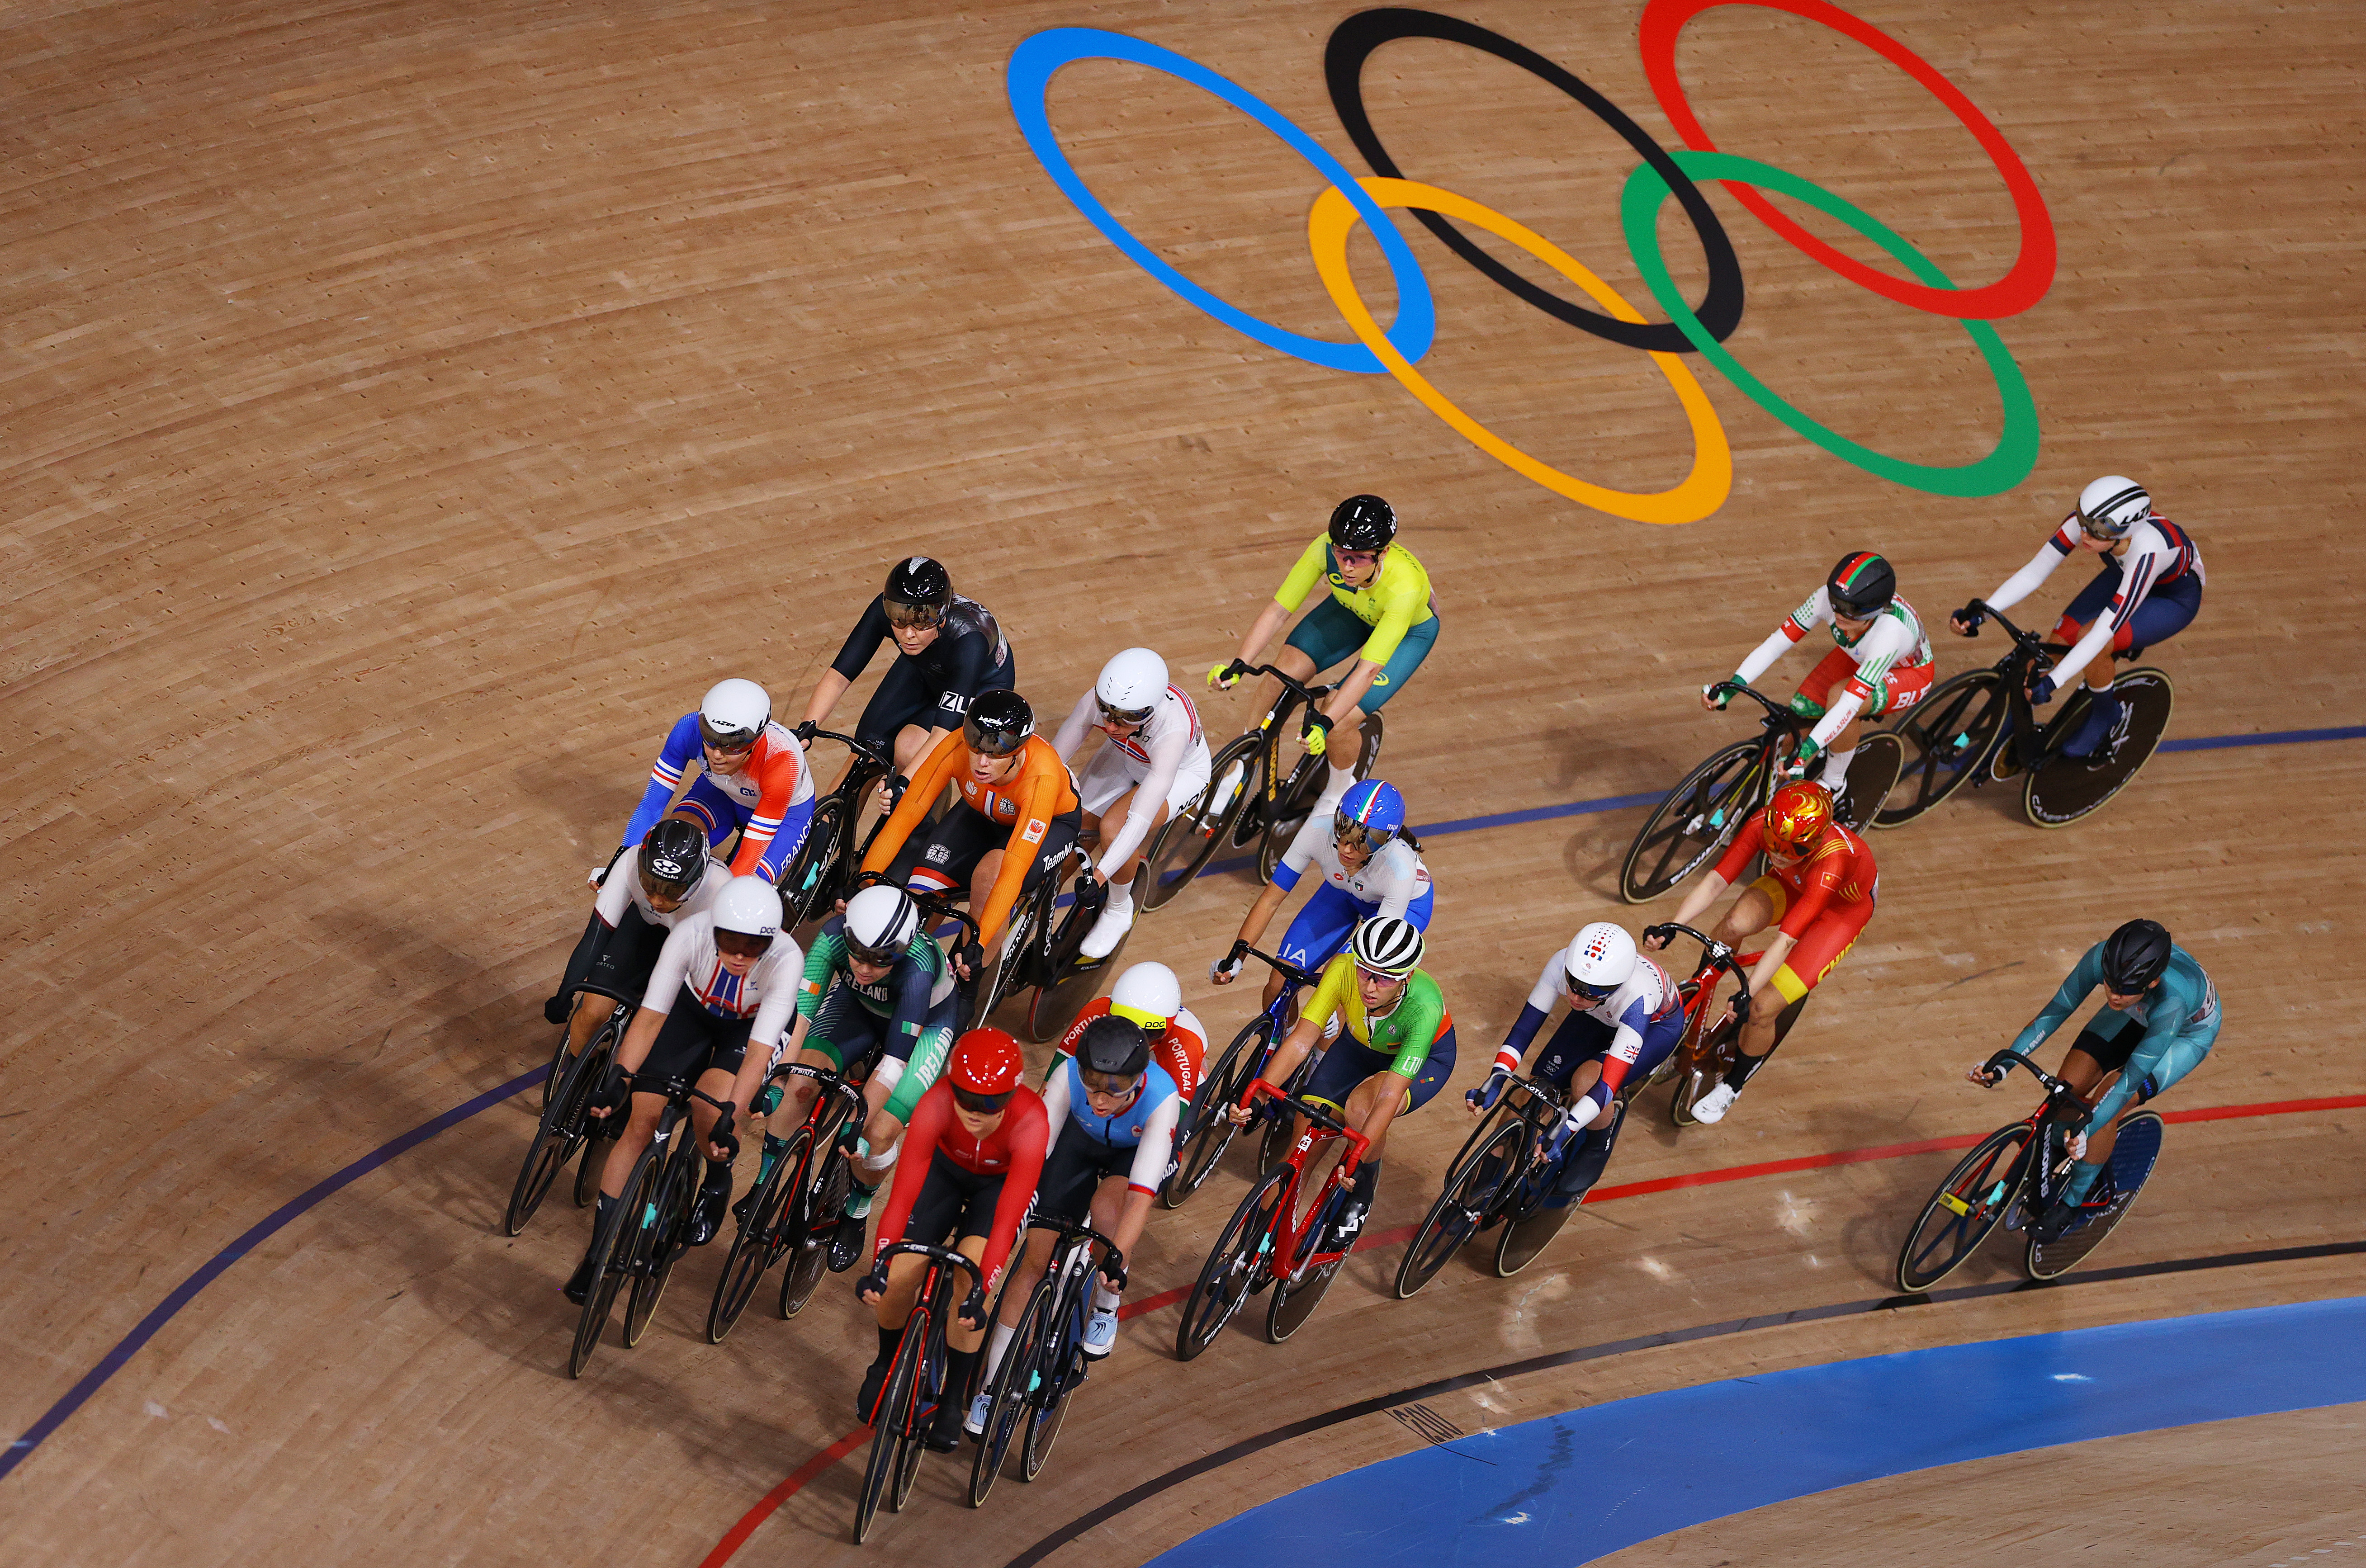 How to watch cycling at the 2024 Olympics in Paris